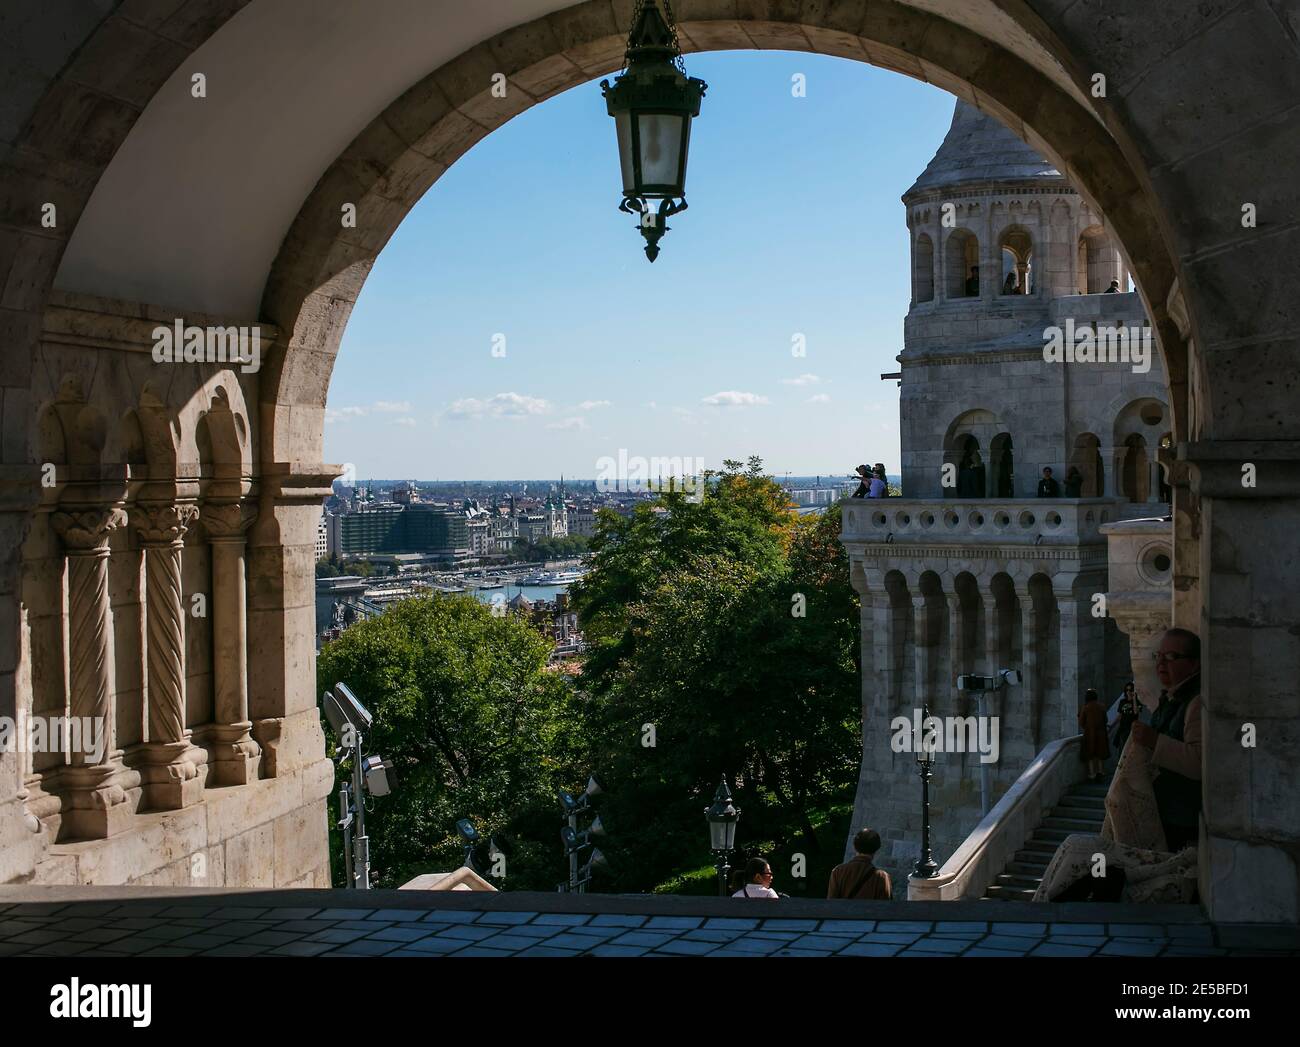 Budapest viewed from arch in Fisherman's Bastion, Castle District, Buda, Budapest, Hungary Stock Photo